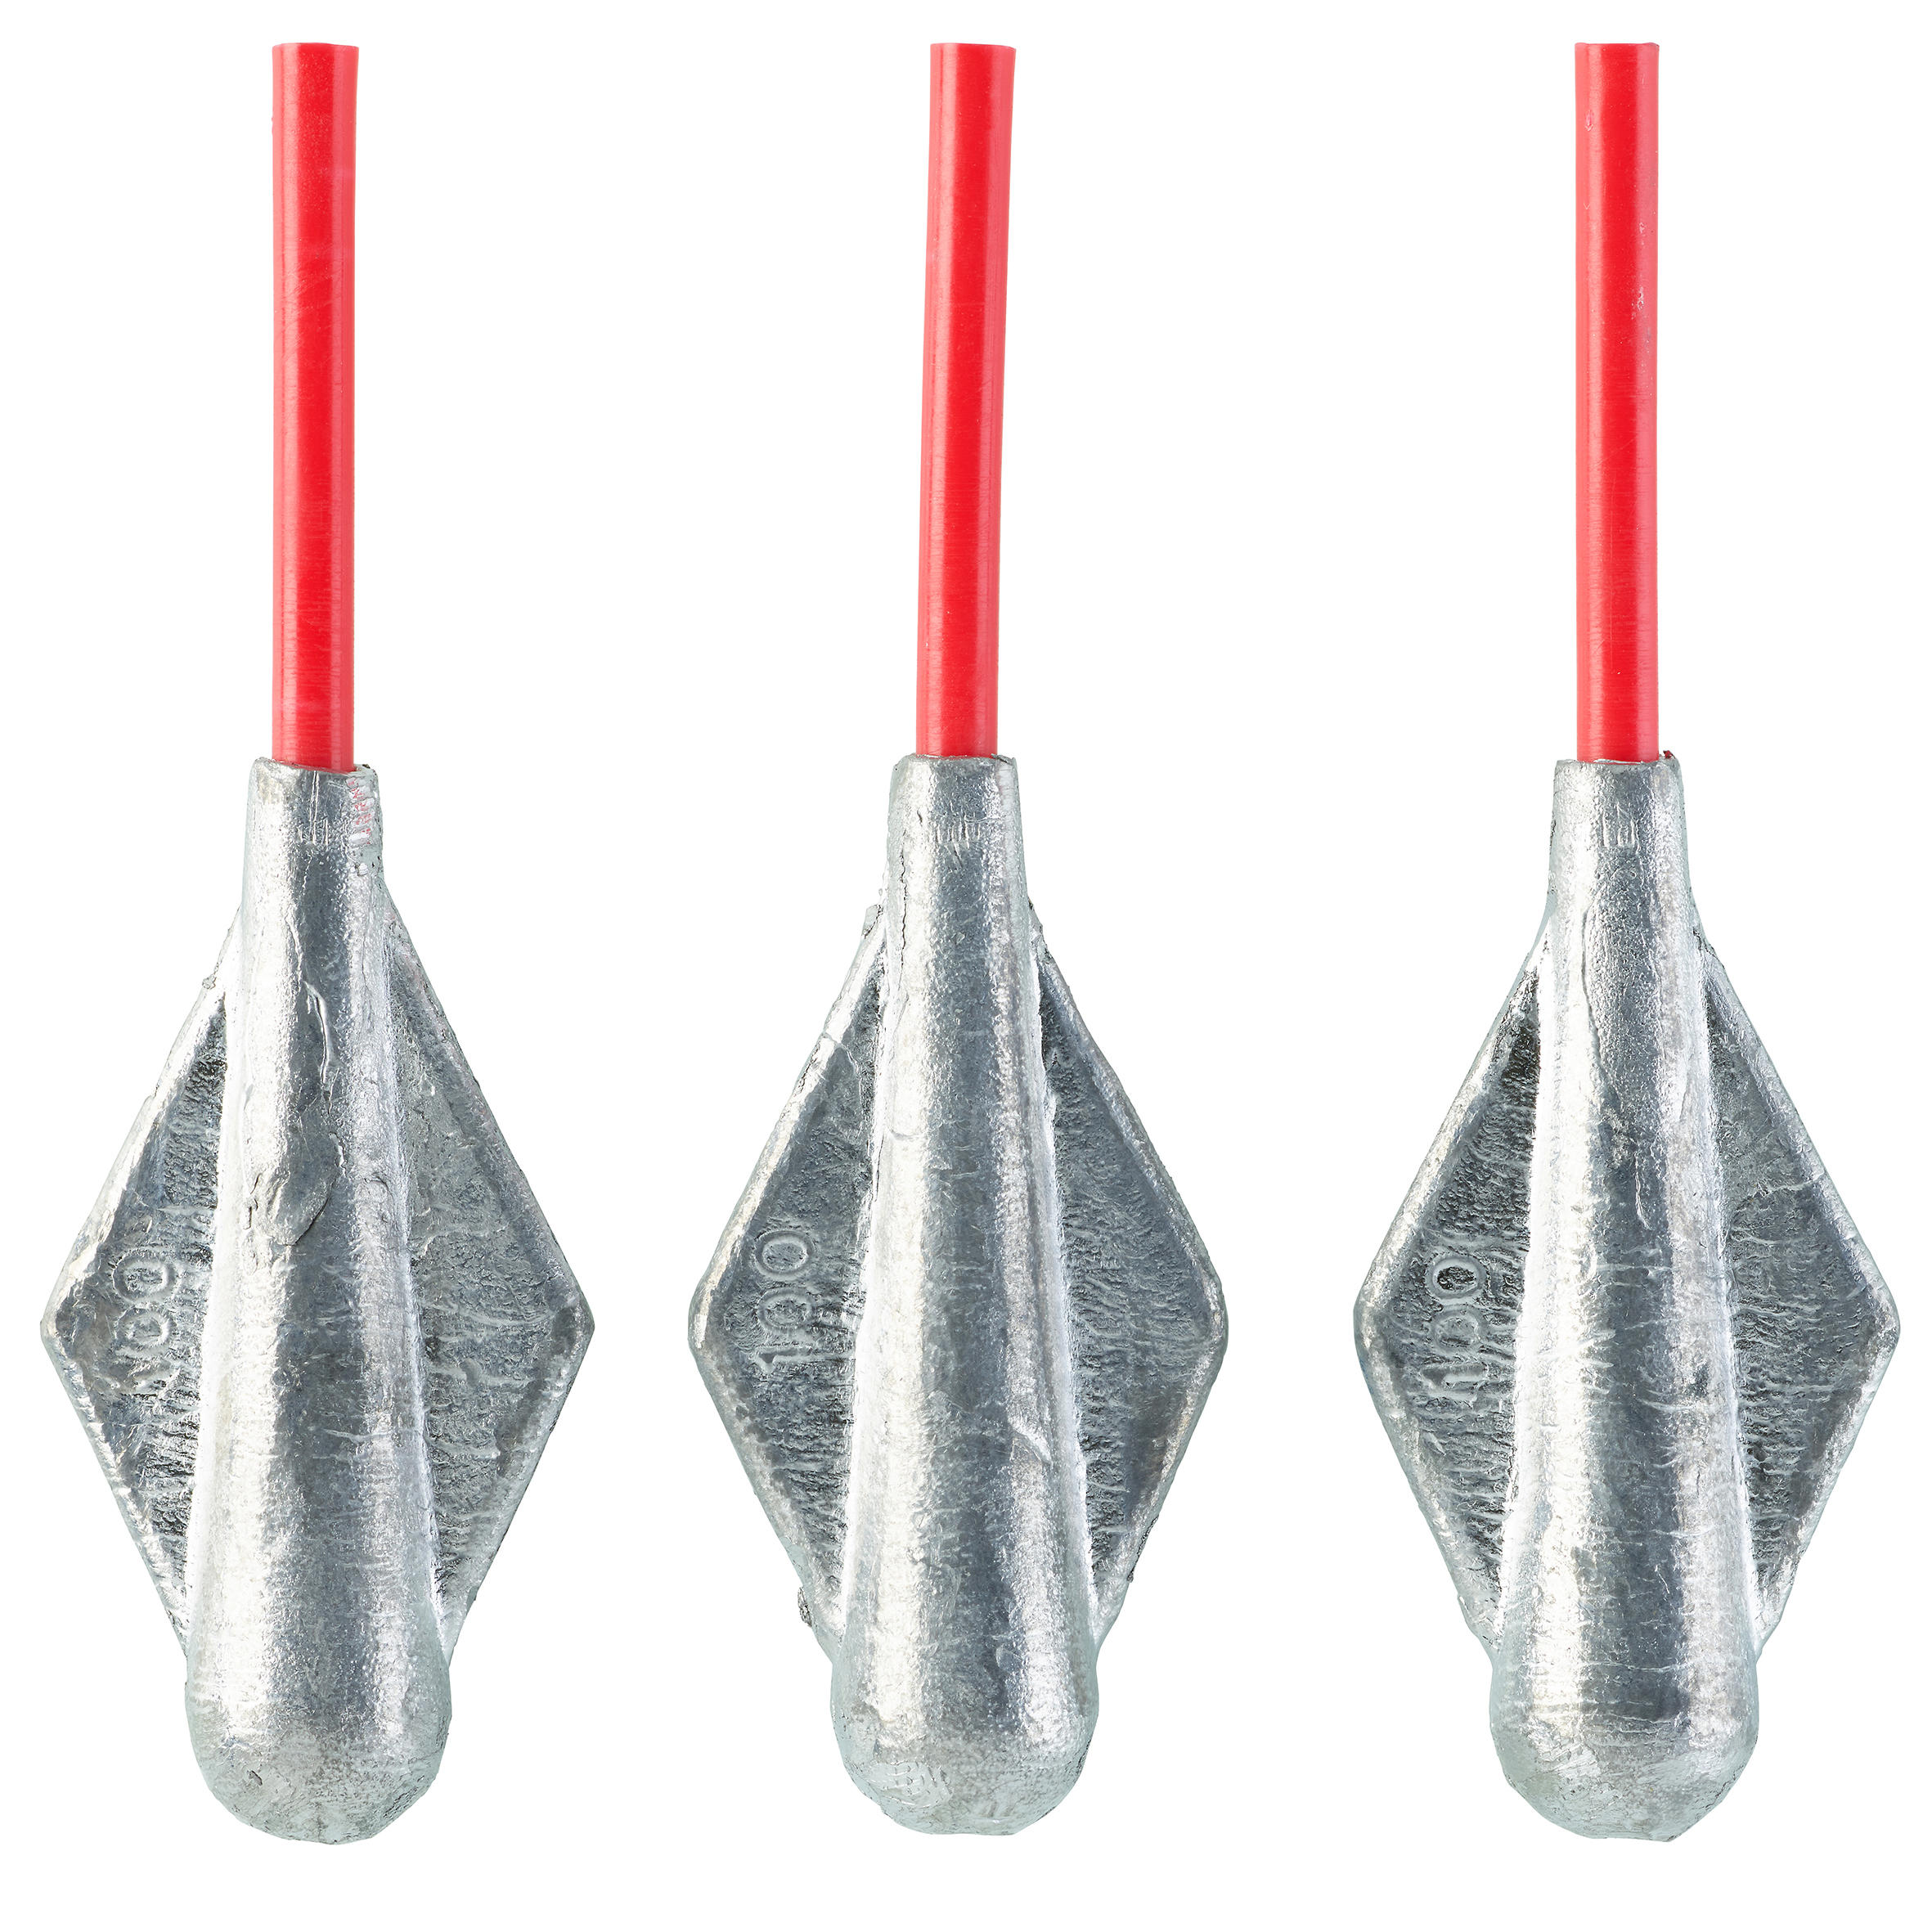 Surfcasting Fishing Tube Sinkers SW TB 3/4